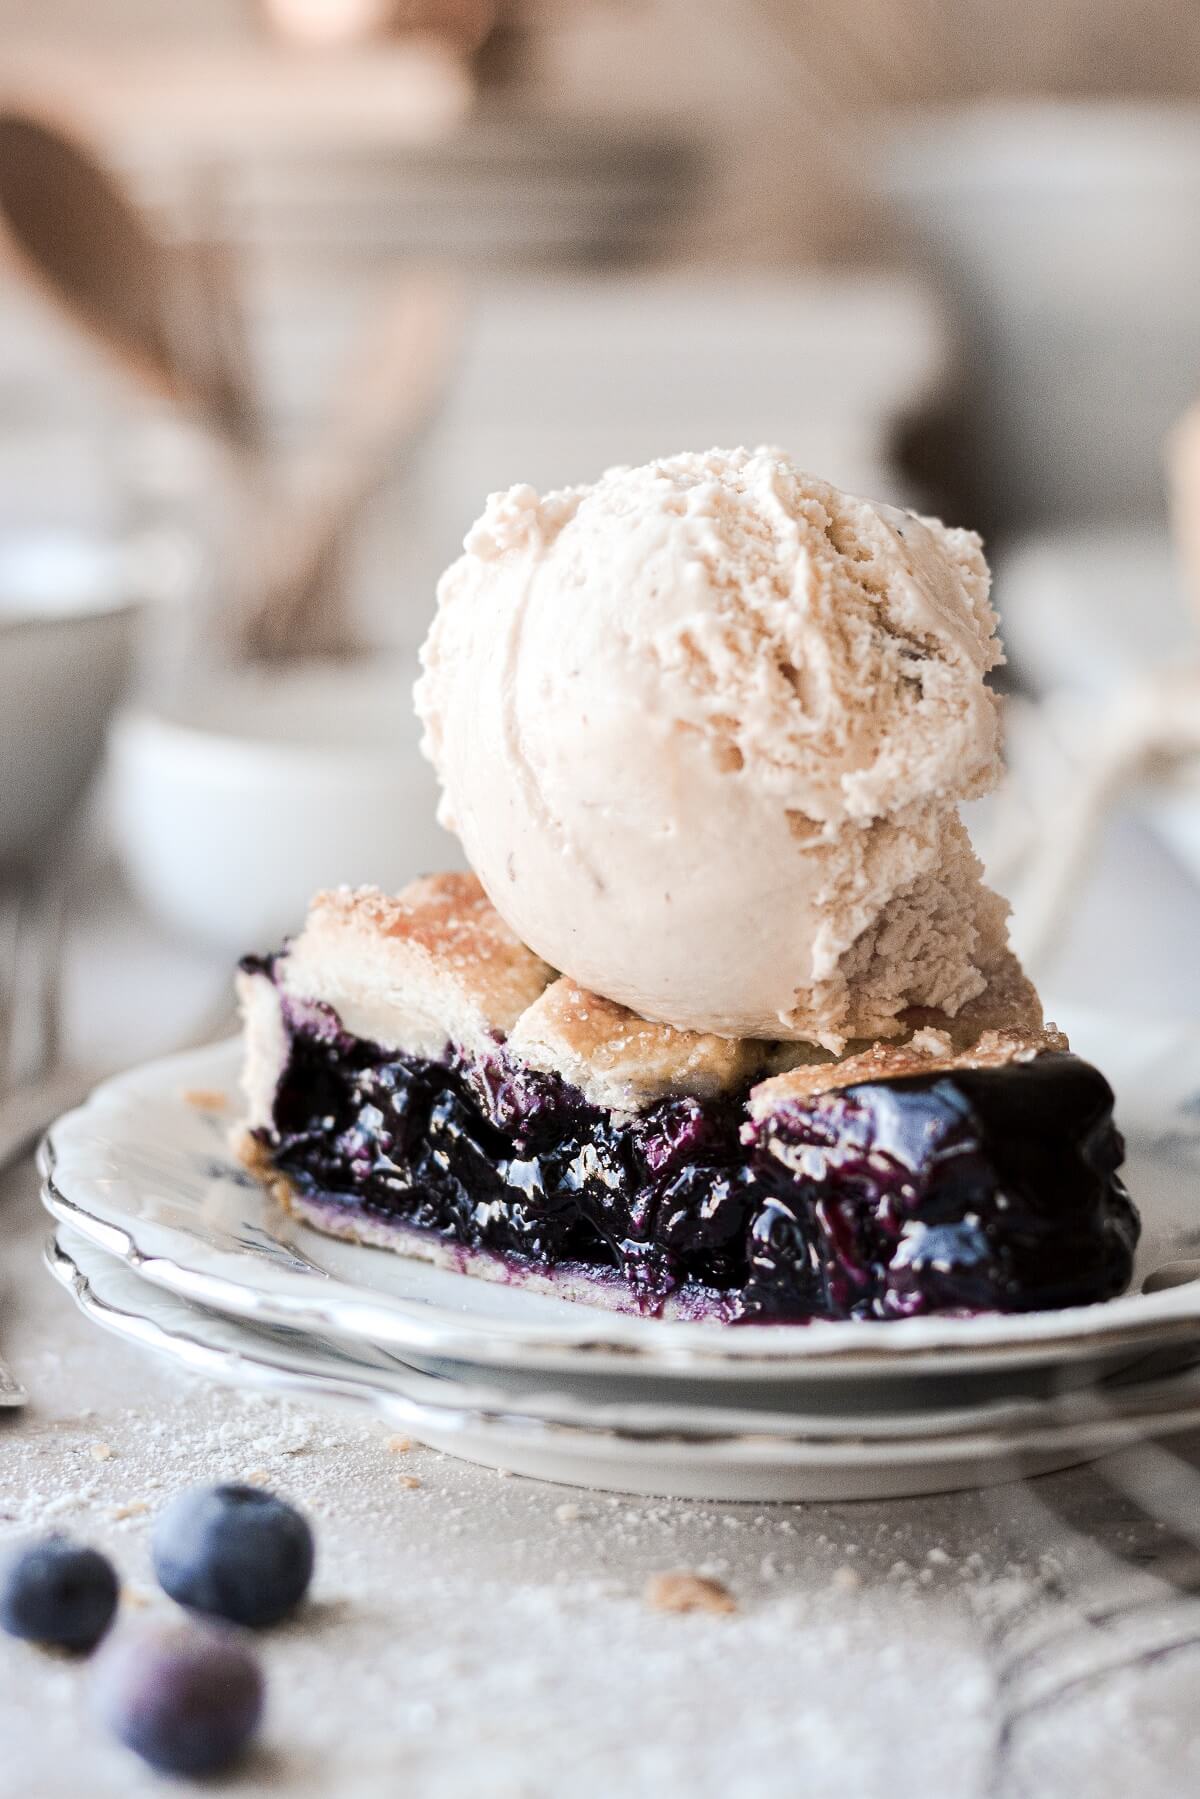 A slice of blueberry pie topped with a scoop of ice cream.